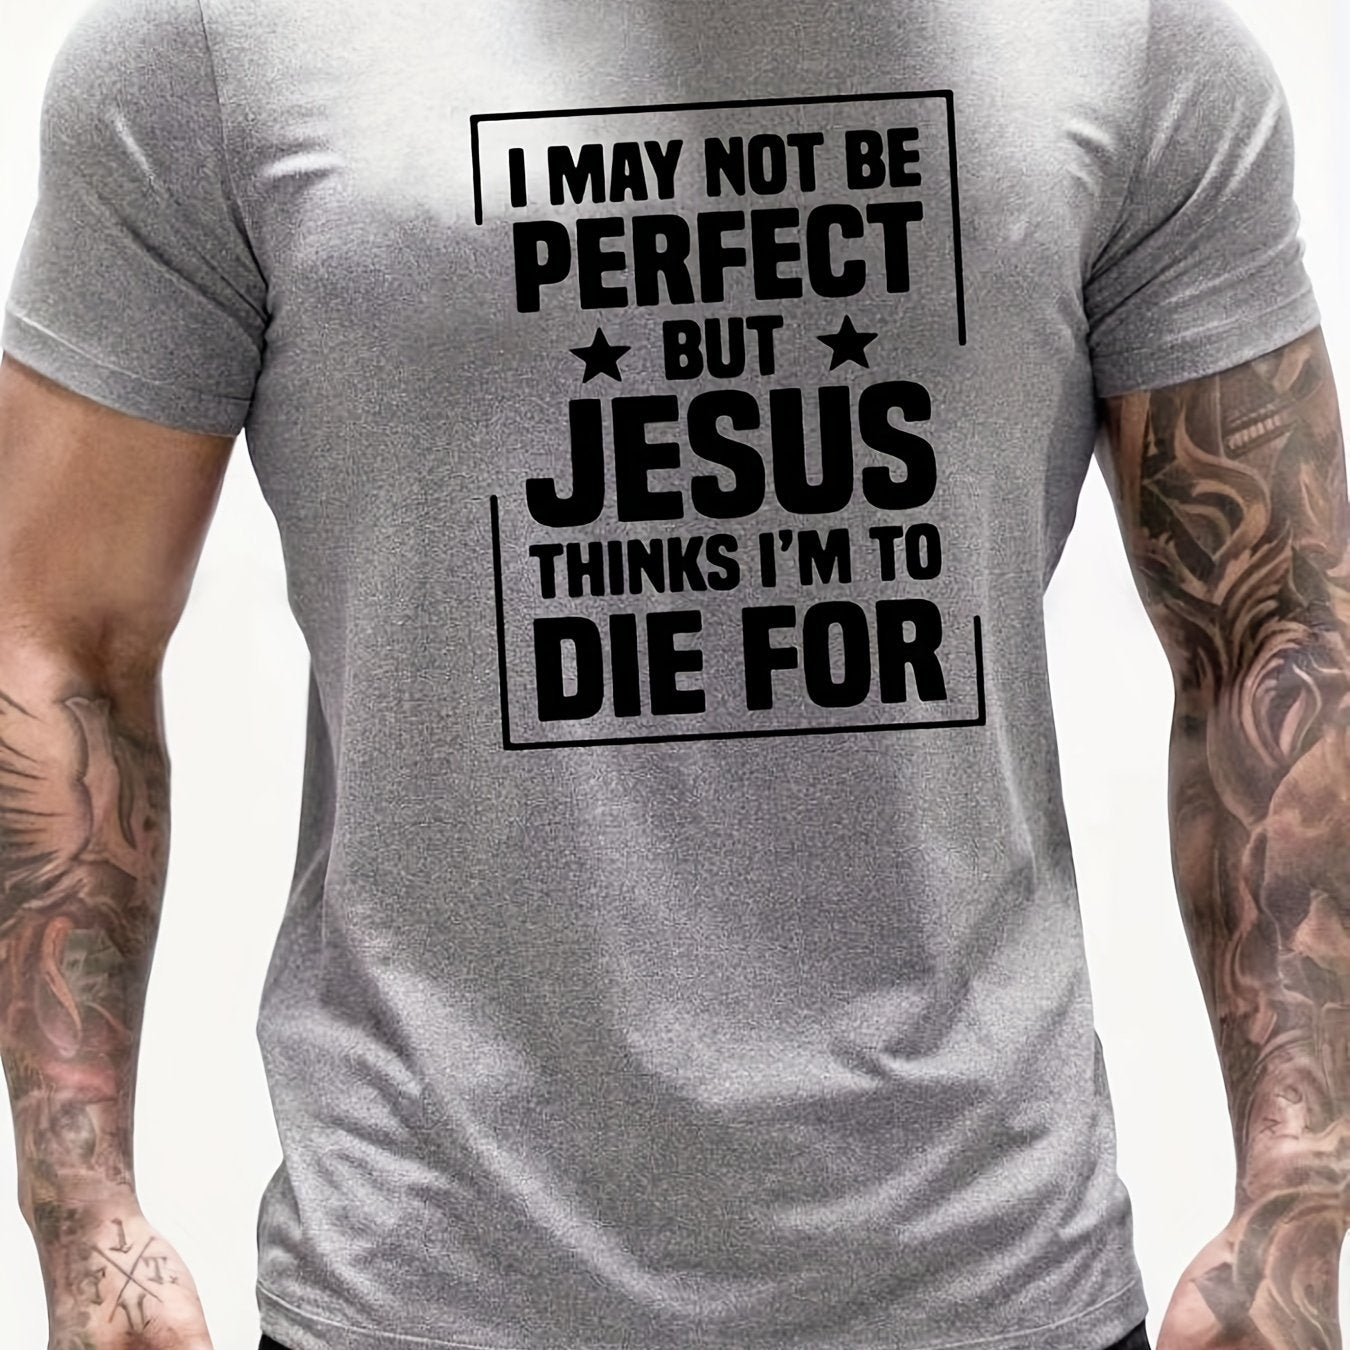 I May Not Be Perfect But Jesus Thinks I'm To Die For Men's Christian T Shirt claimedbygoddesigns